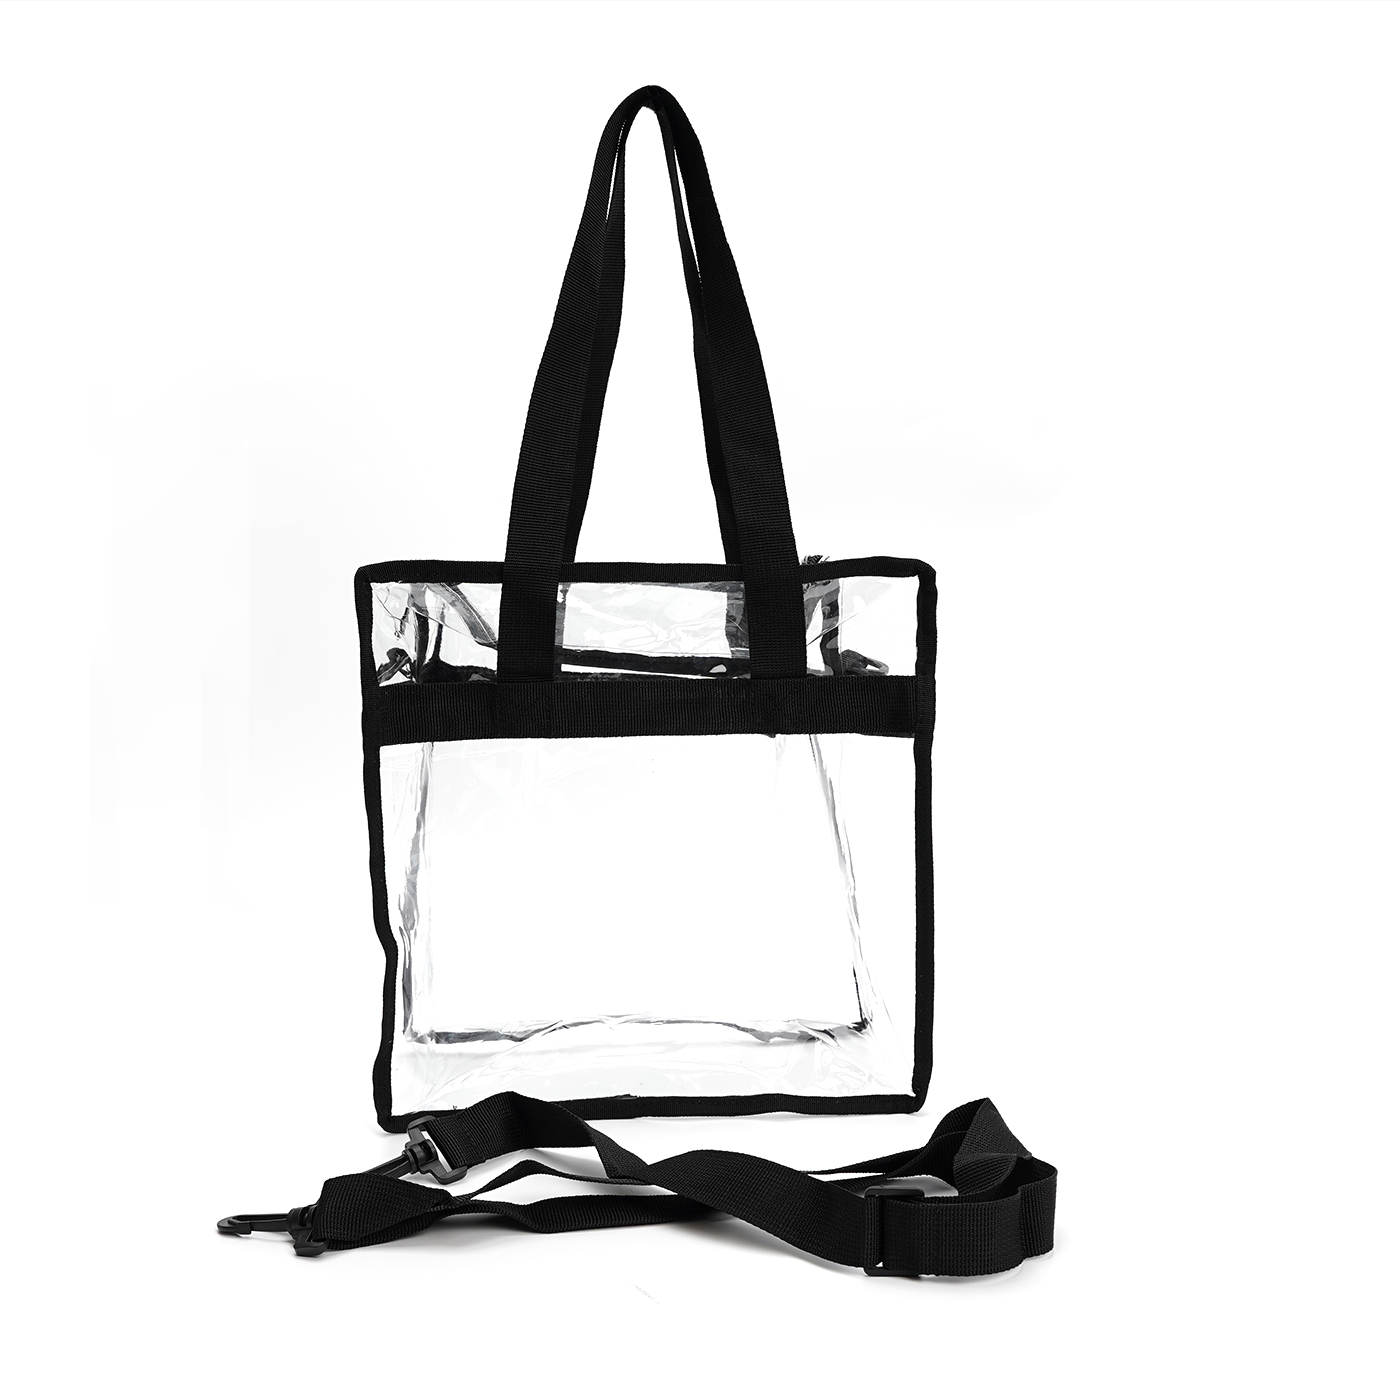 Clear Zippered Tote Bag With Shoulder Strap2